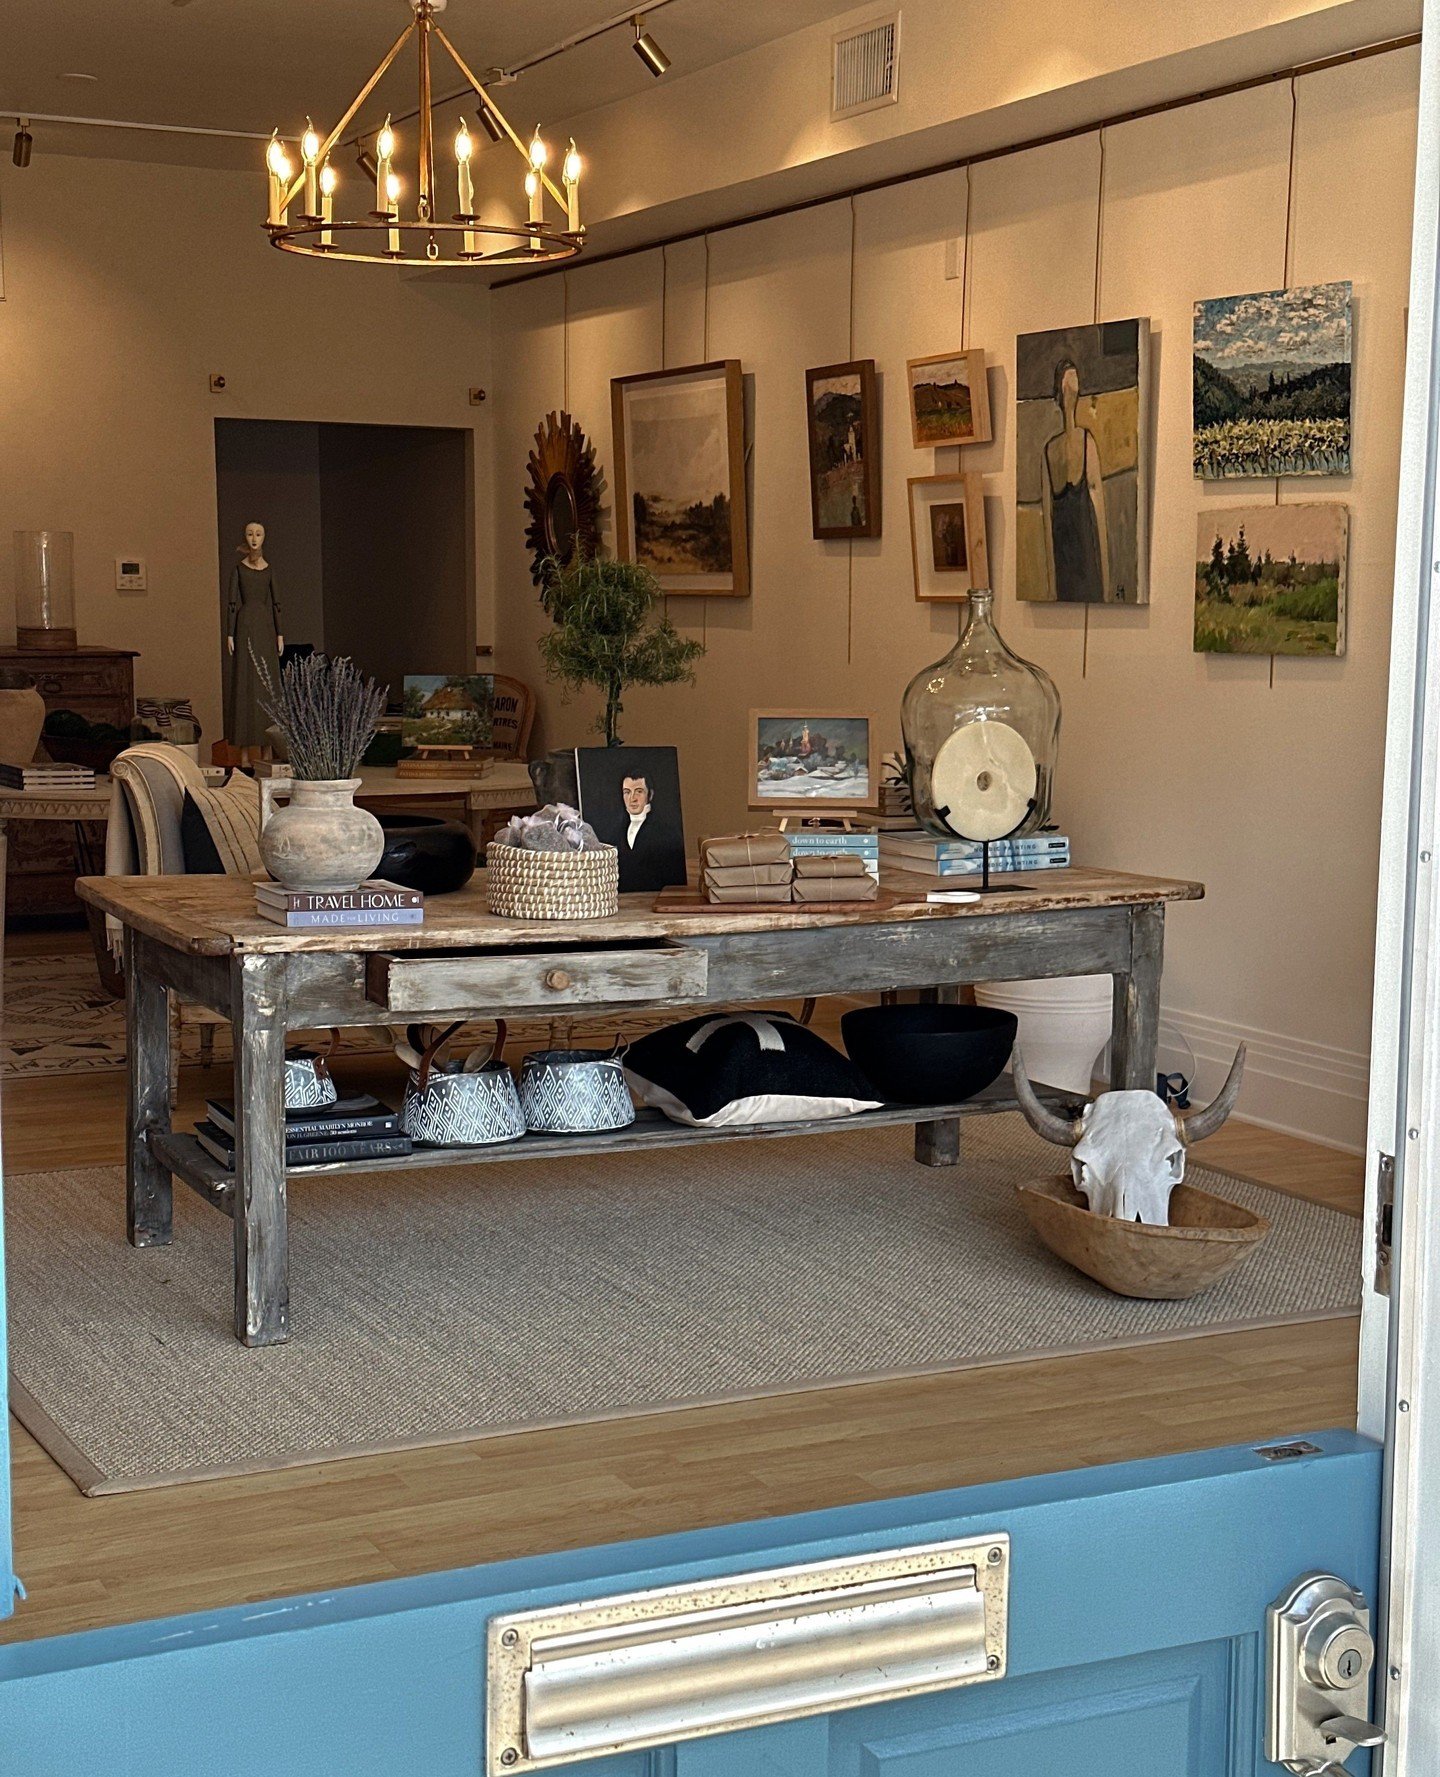 A peek inside our new shop on Balboa Island ☀️ We are a boutique known for our curated collection of distinctive pieces including European antiques, art, and home accessories.⁠
⁠
While living in London, Georgia began collecting and sourcing antiques 